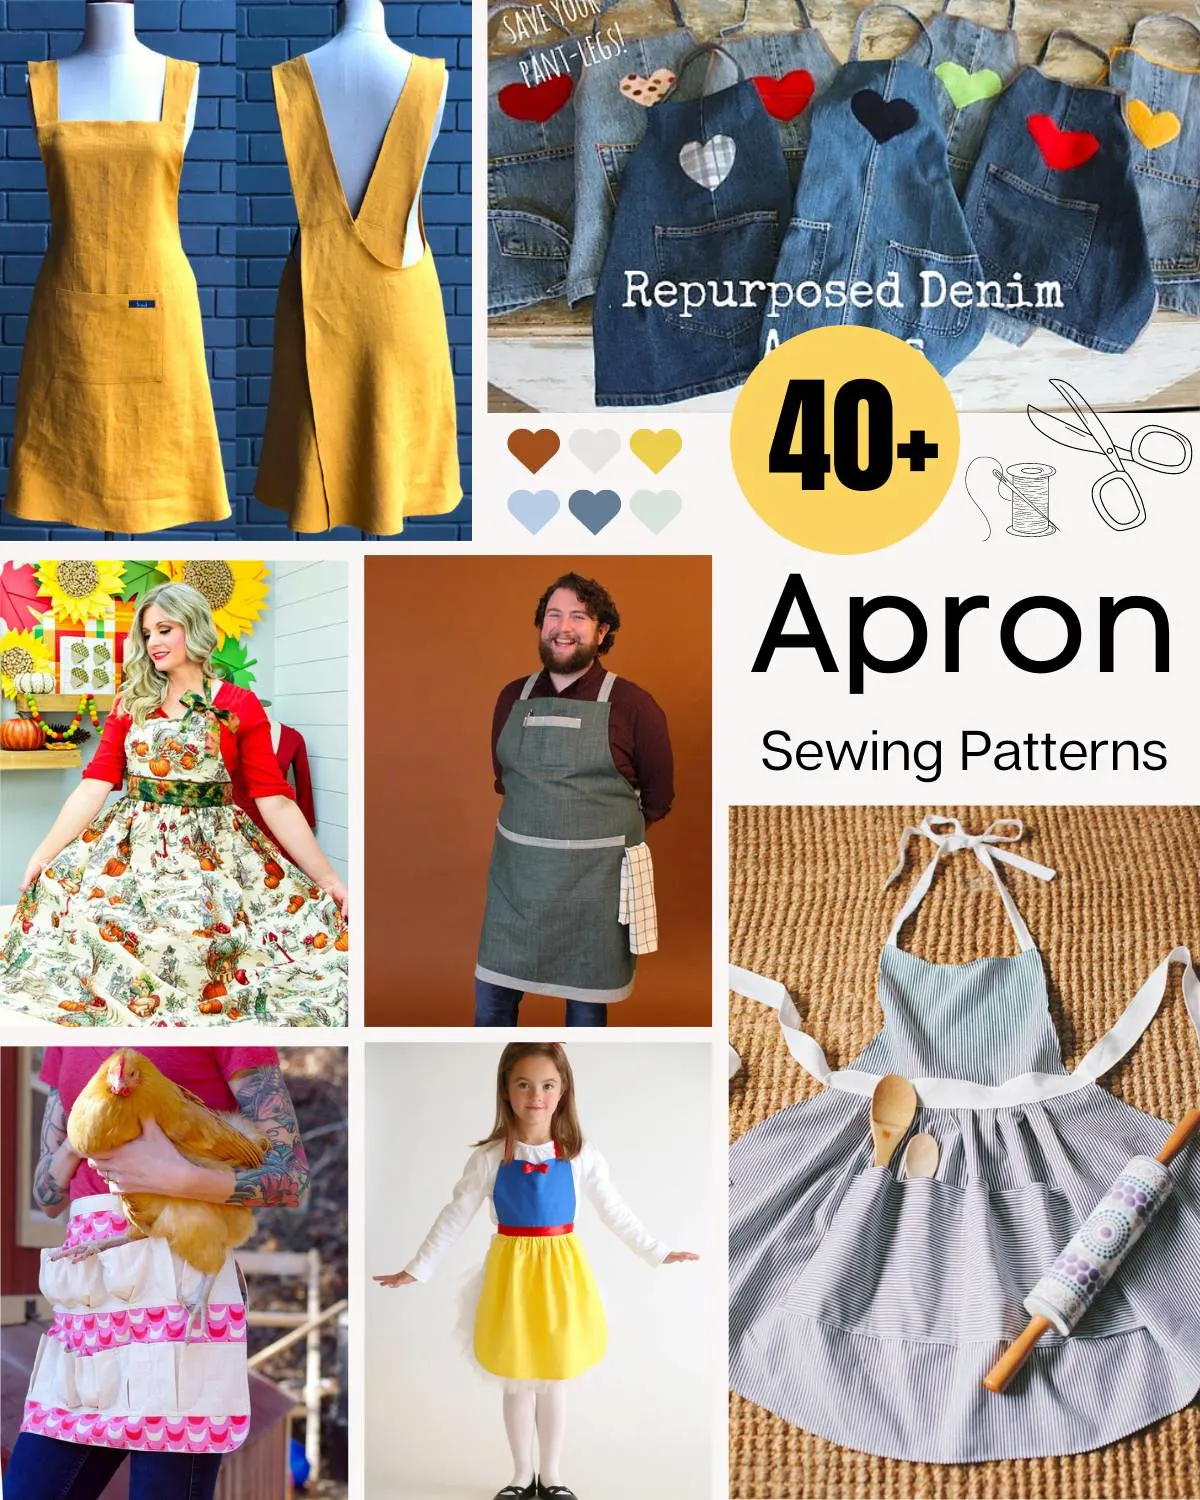 https://www.craftpassion.com/wp-content/uploads/free-apron-sewing-patterns.jpg.webp